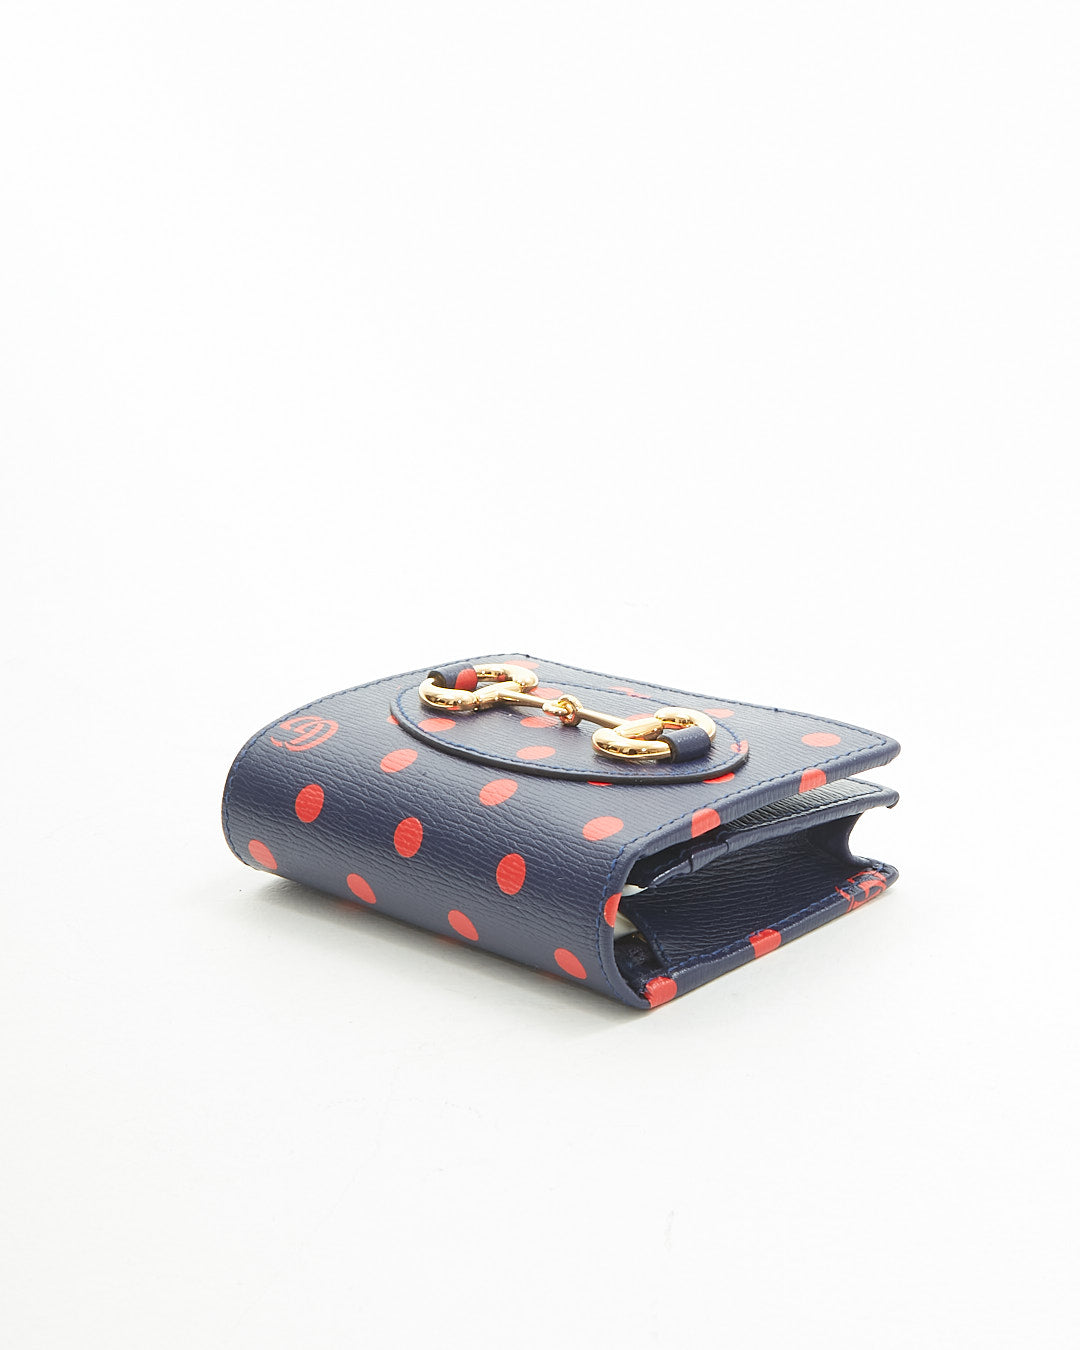 Gucci Navy/Red Leather Polka Dot 1955 Horsebit Wallet